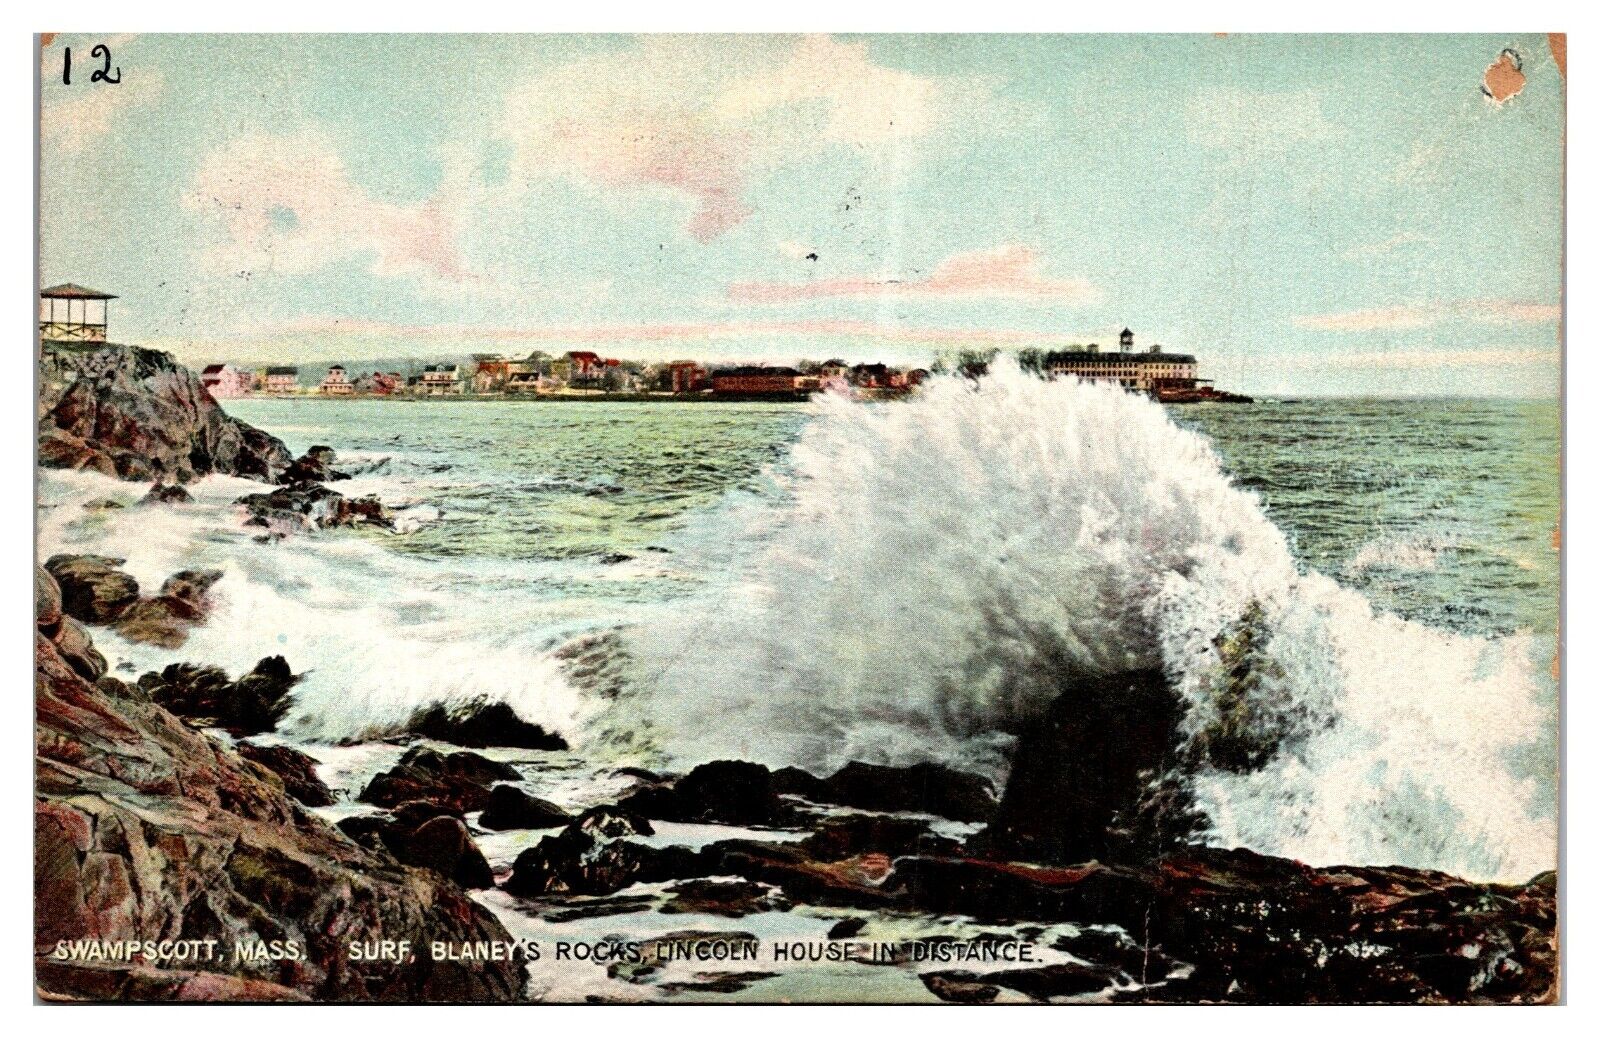 1908 Surf, Blaneys Rocks, Lincoln House in Distance, Swampscott, MA